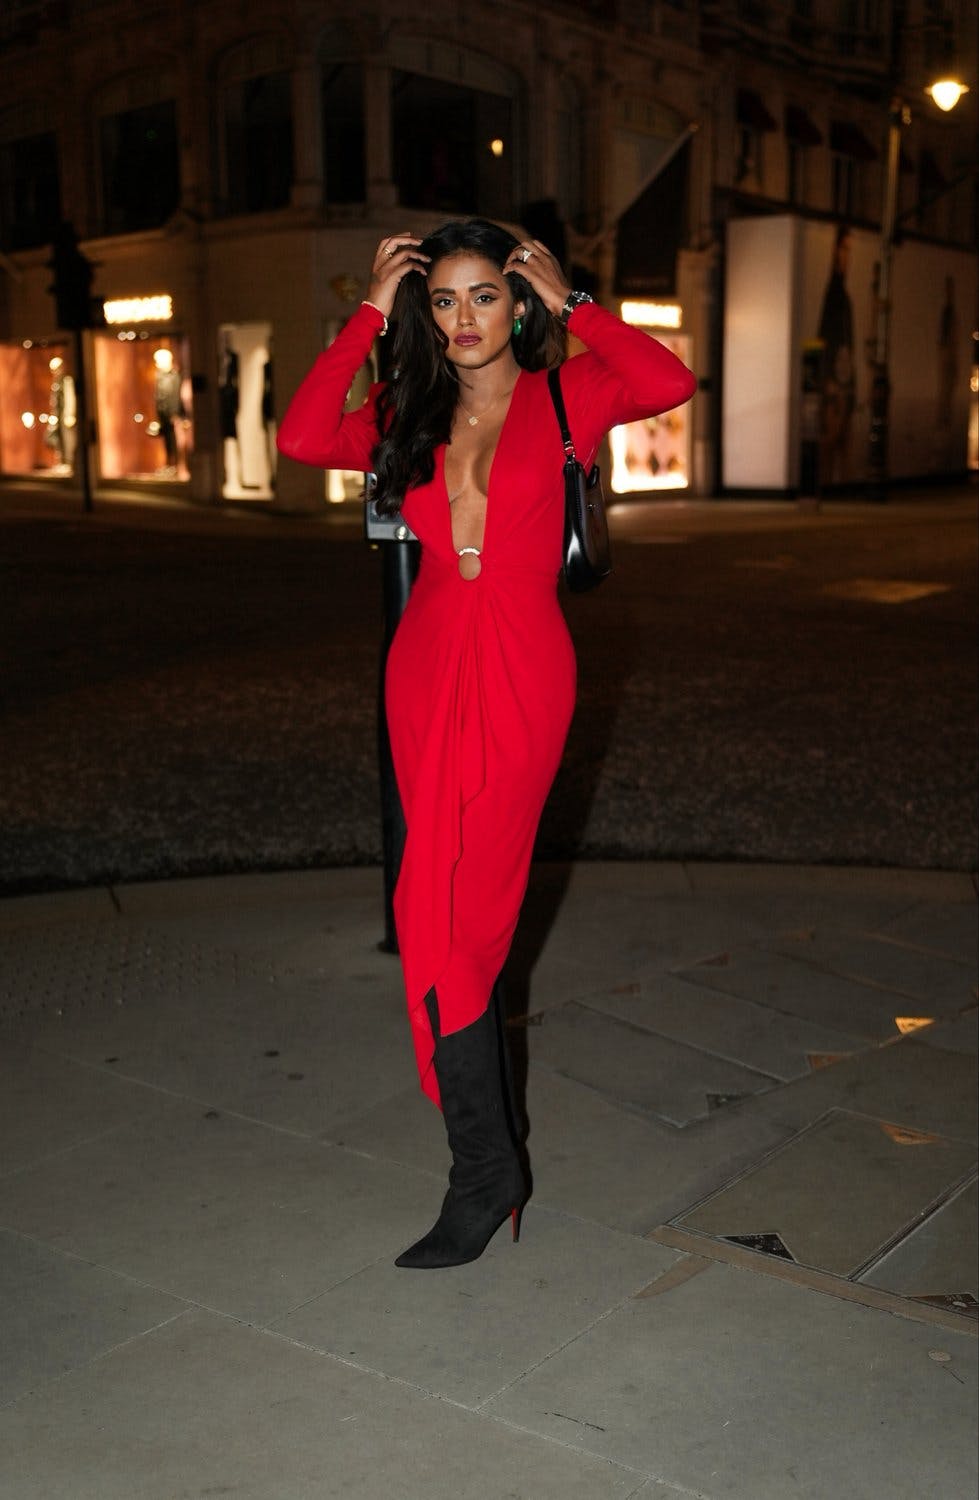 Sachini Dilanka wearing a red Alexandre Vauthier dress in London